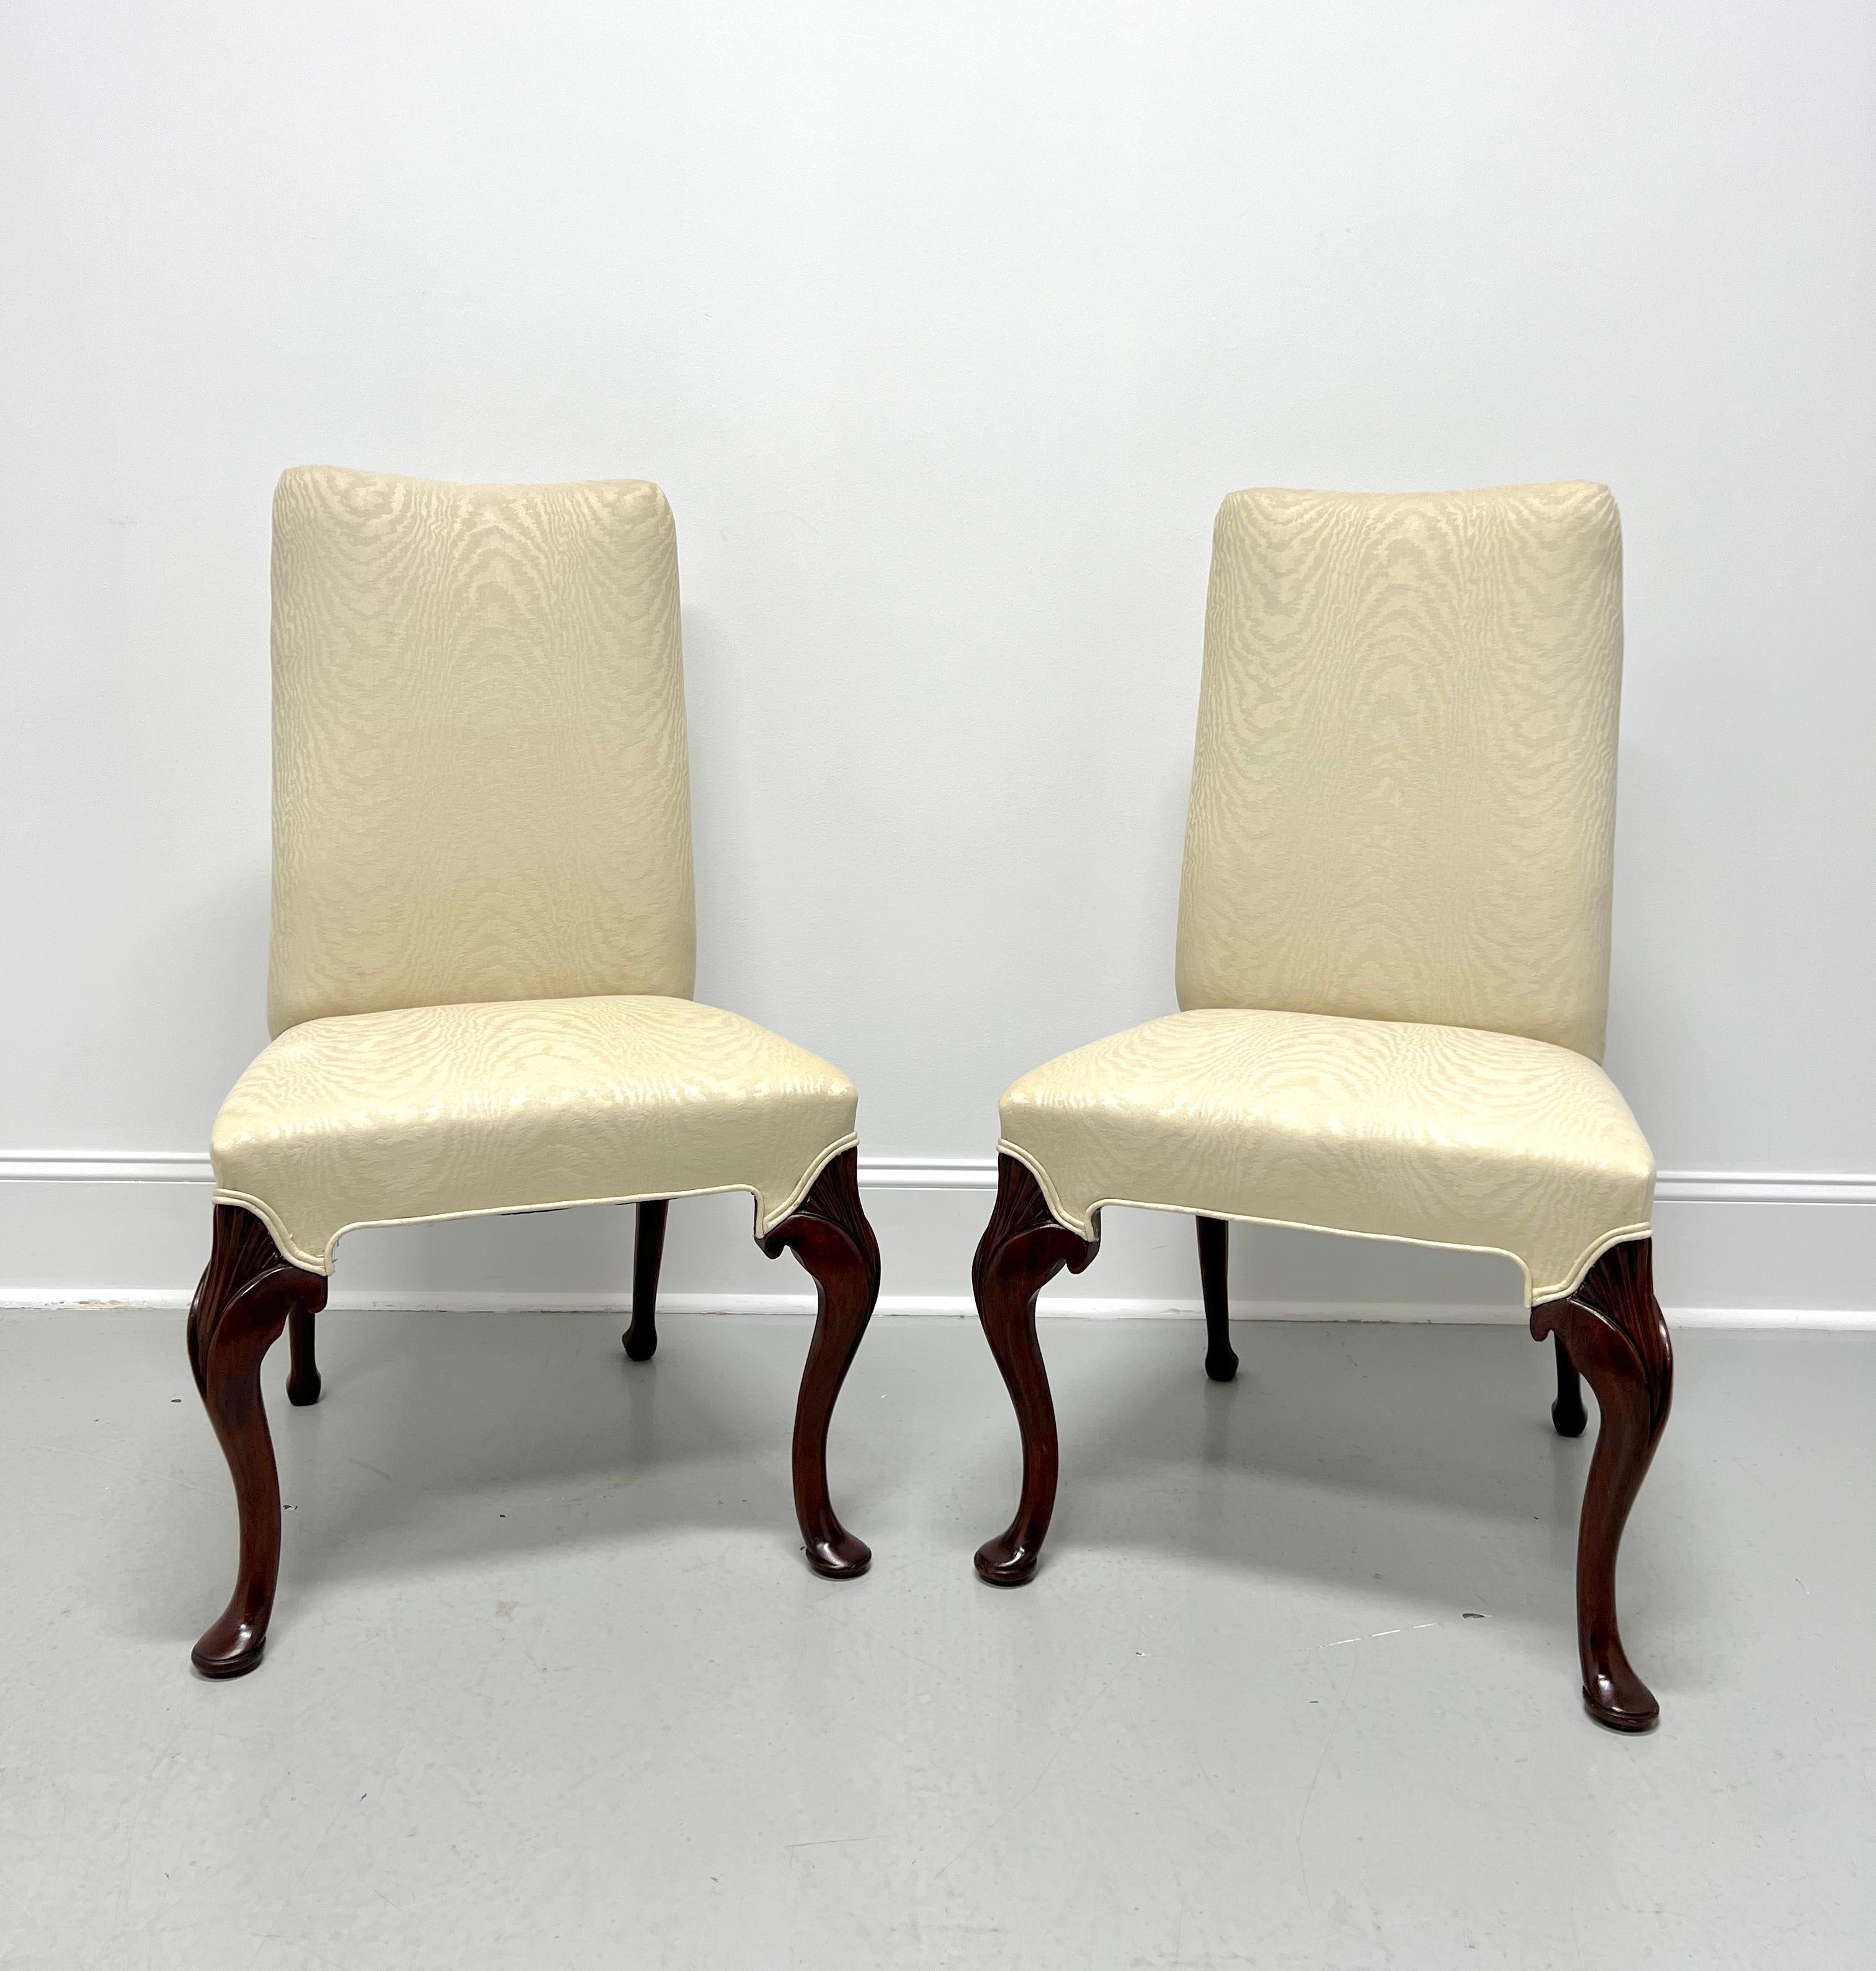 Late 20th Century Mahogany Frame French Provincial Parsons Chairs - Pair For Sale 5